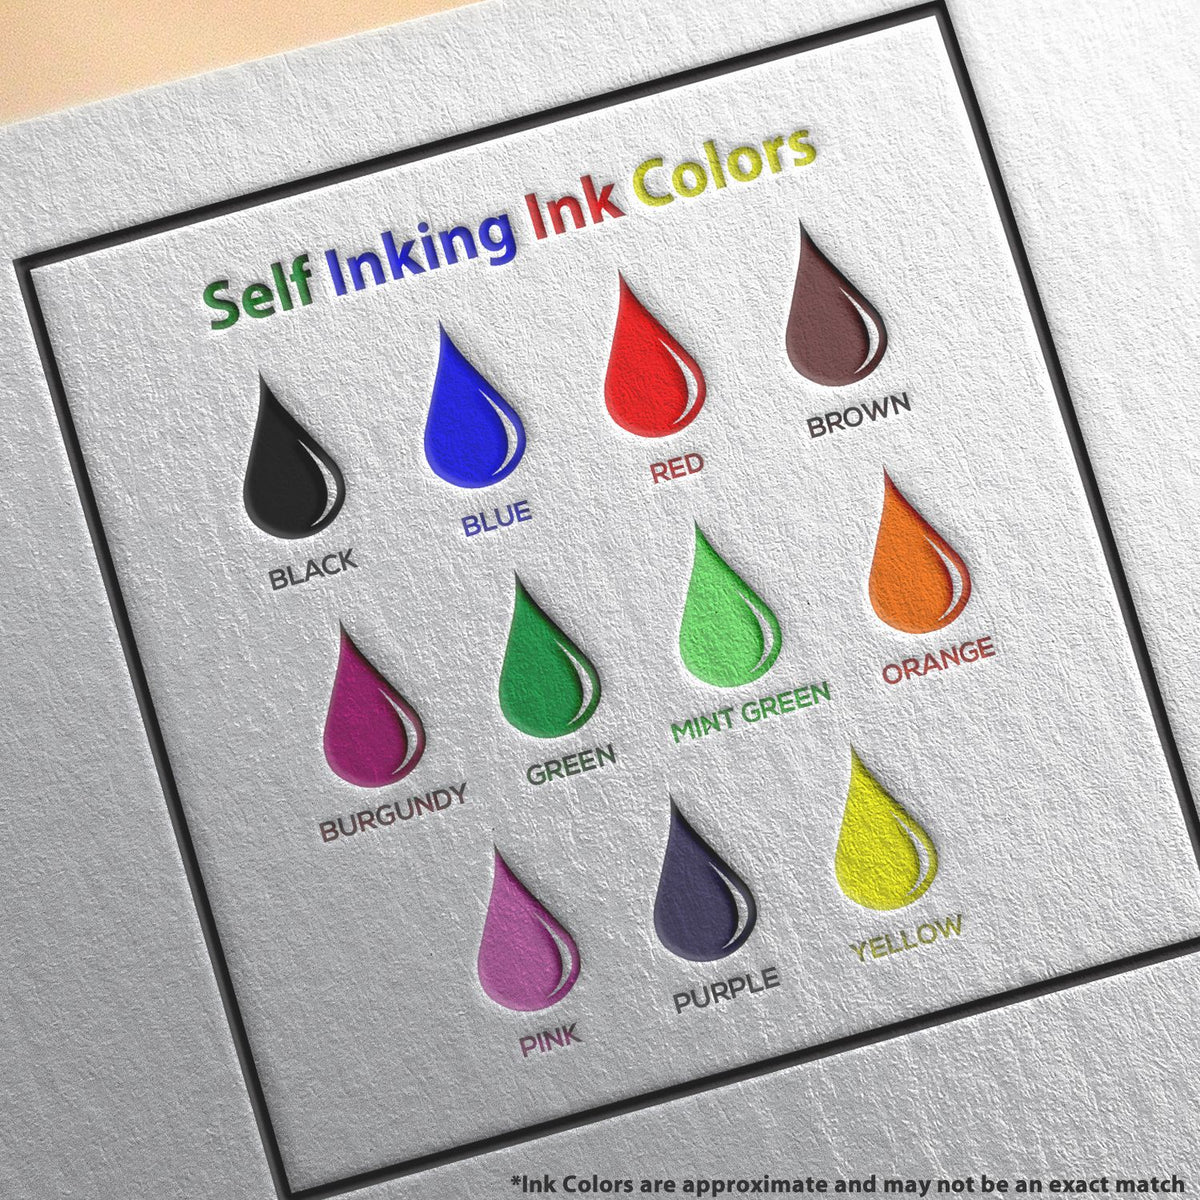 A picture showing the different ink colors or hues available for the Heavy-Duty Michigan Rectangular Notary Stamp product.